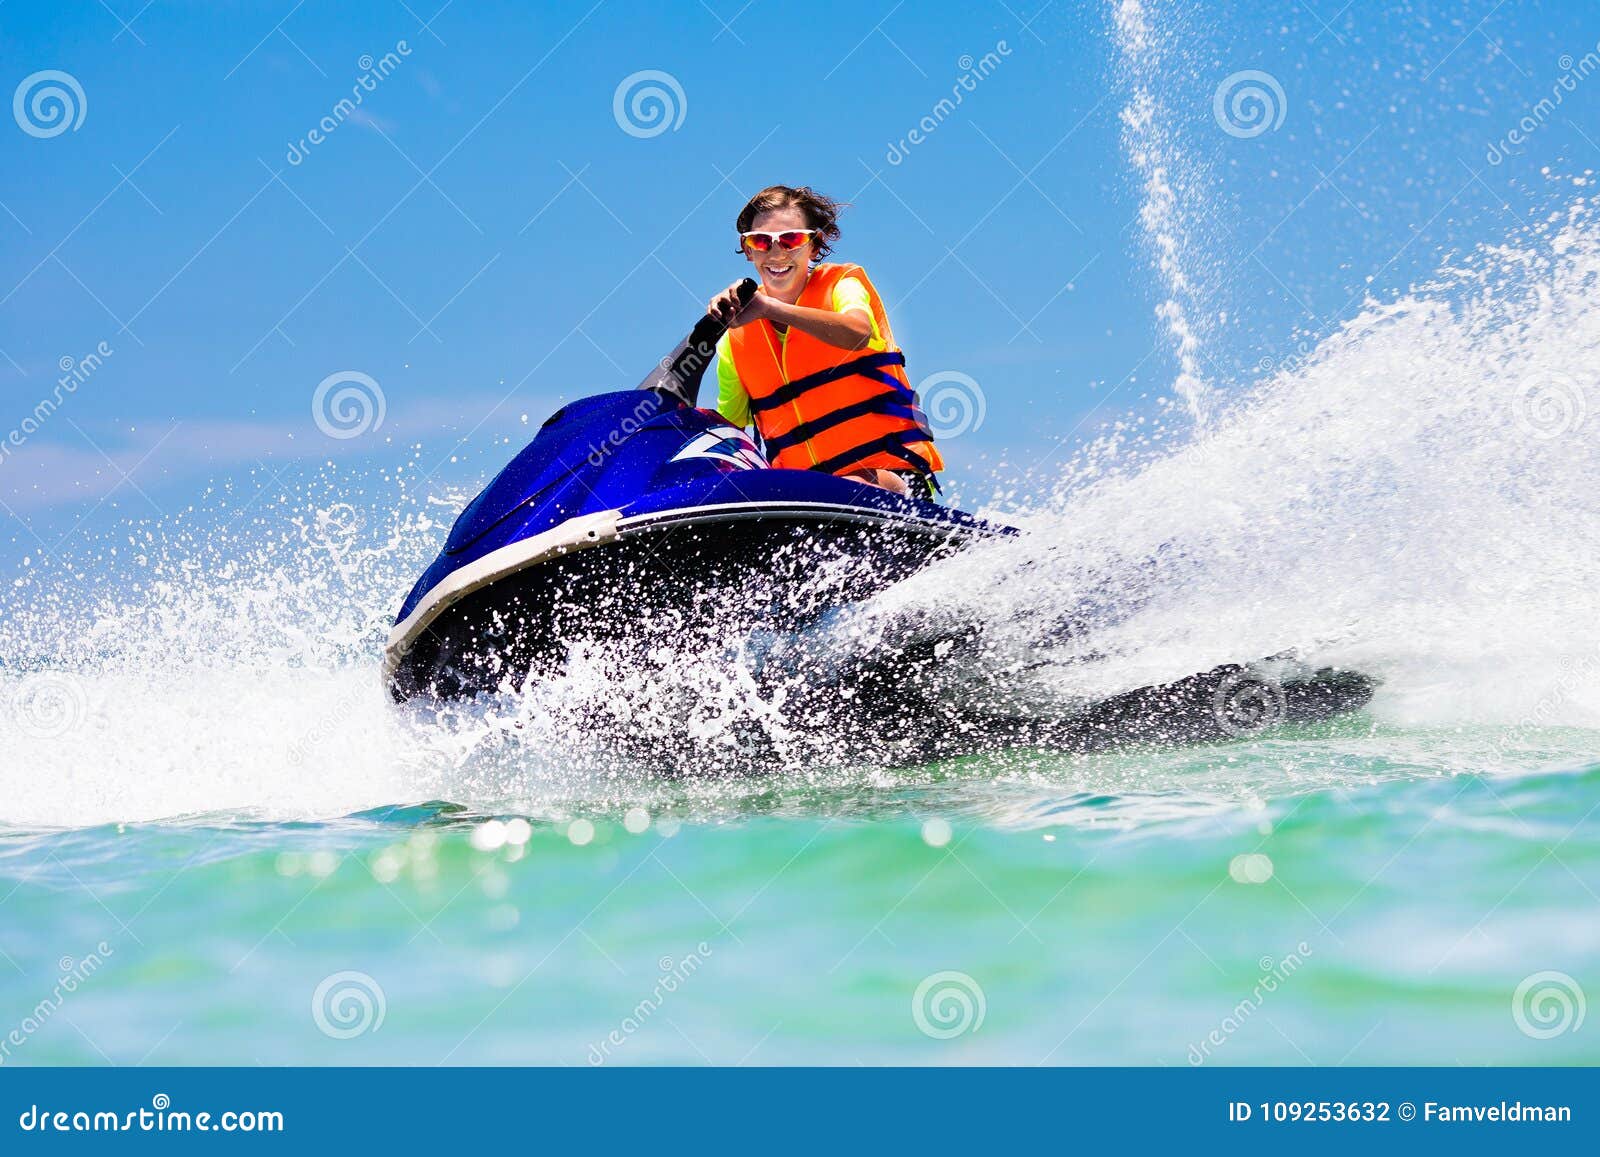 Blue-haired petite teen riding a jet ski - wide 5